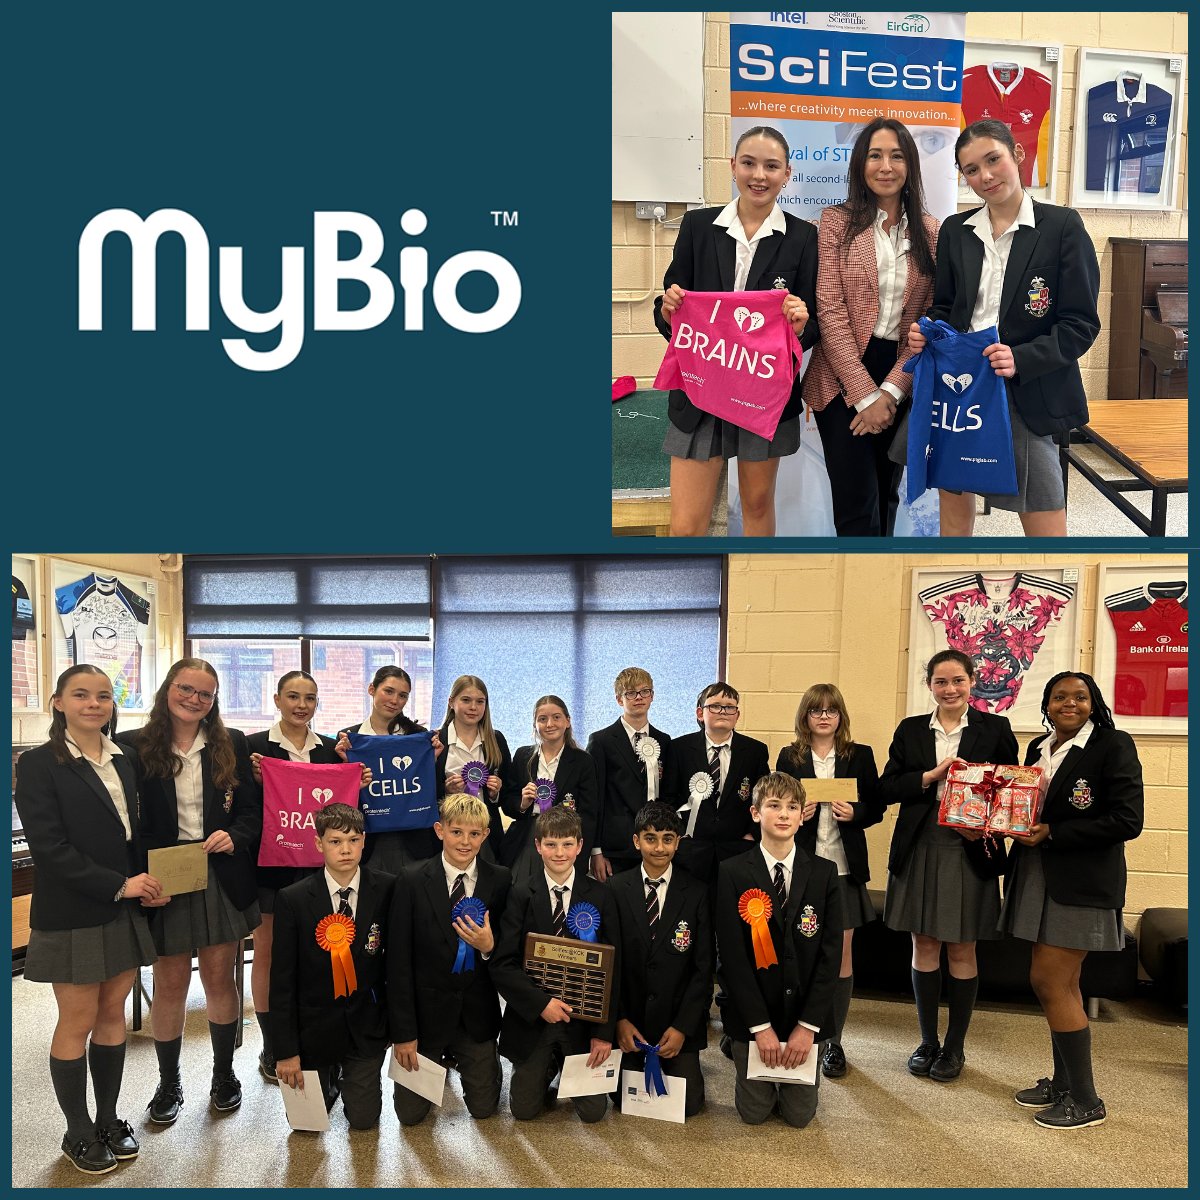 MyBio's Linda Nolan was honoured to judge @scifest4stem in @kilkennycollege this week🧬
The winners of @mybioltd Prize went to the project titled 'What is the Dirtiest Object”🦠
Great projects presented by all💫
#congratulations to each category winner👏
#scifest #support #local